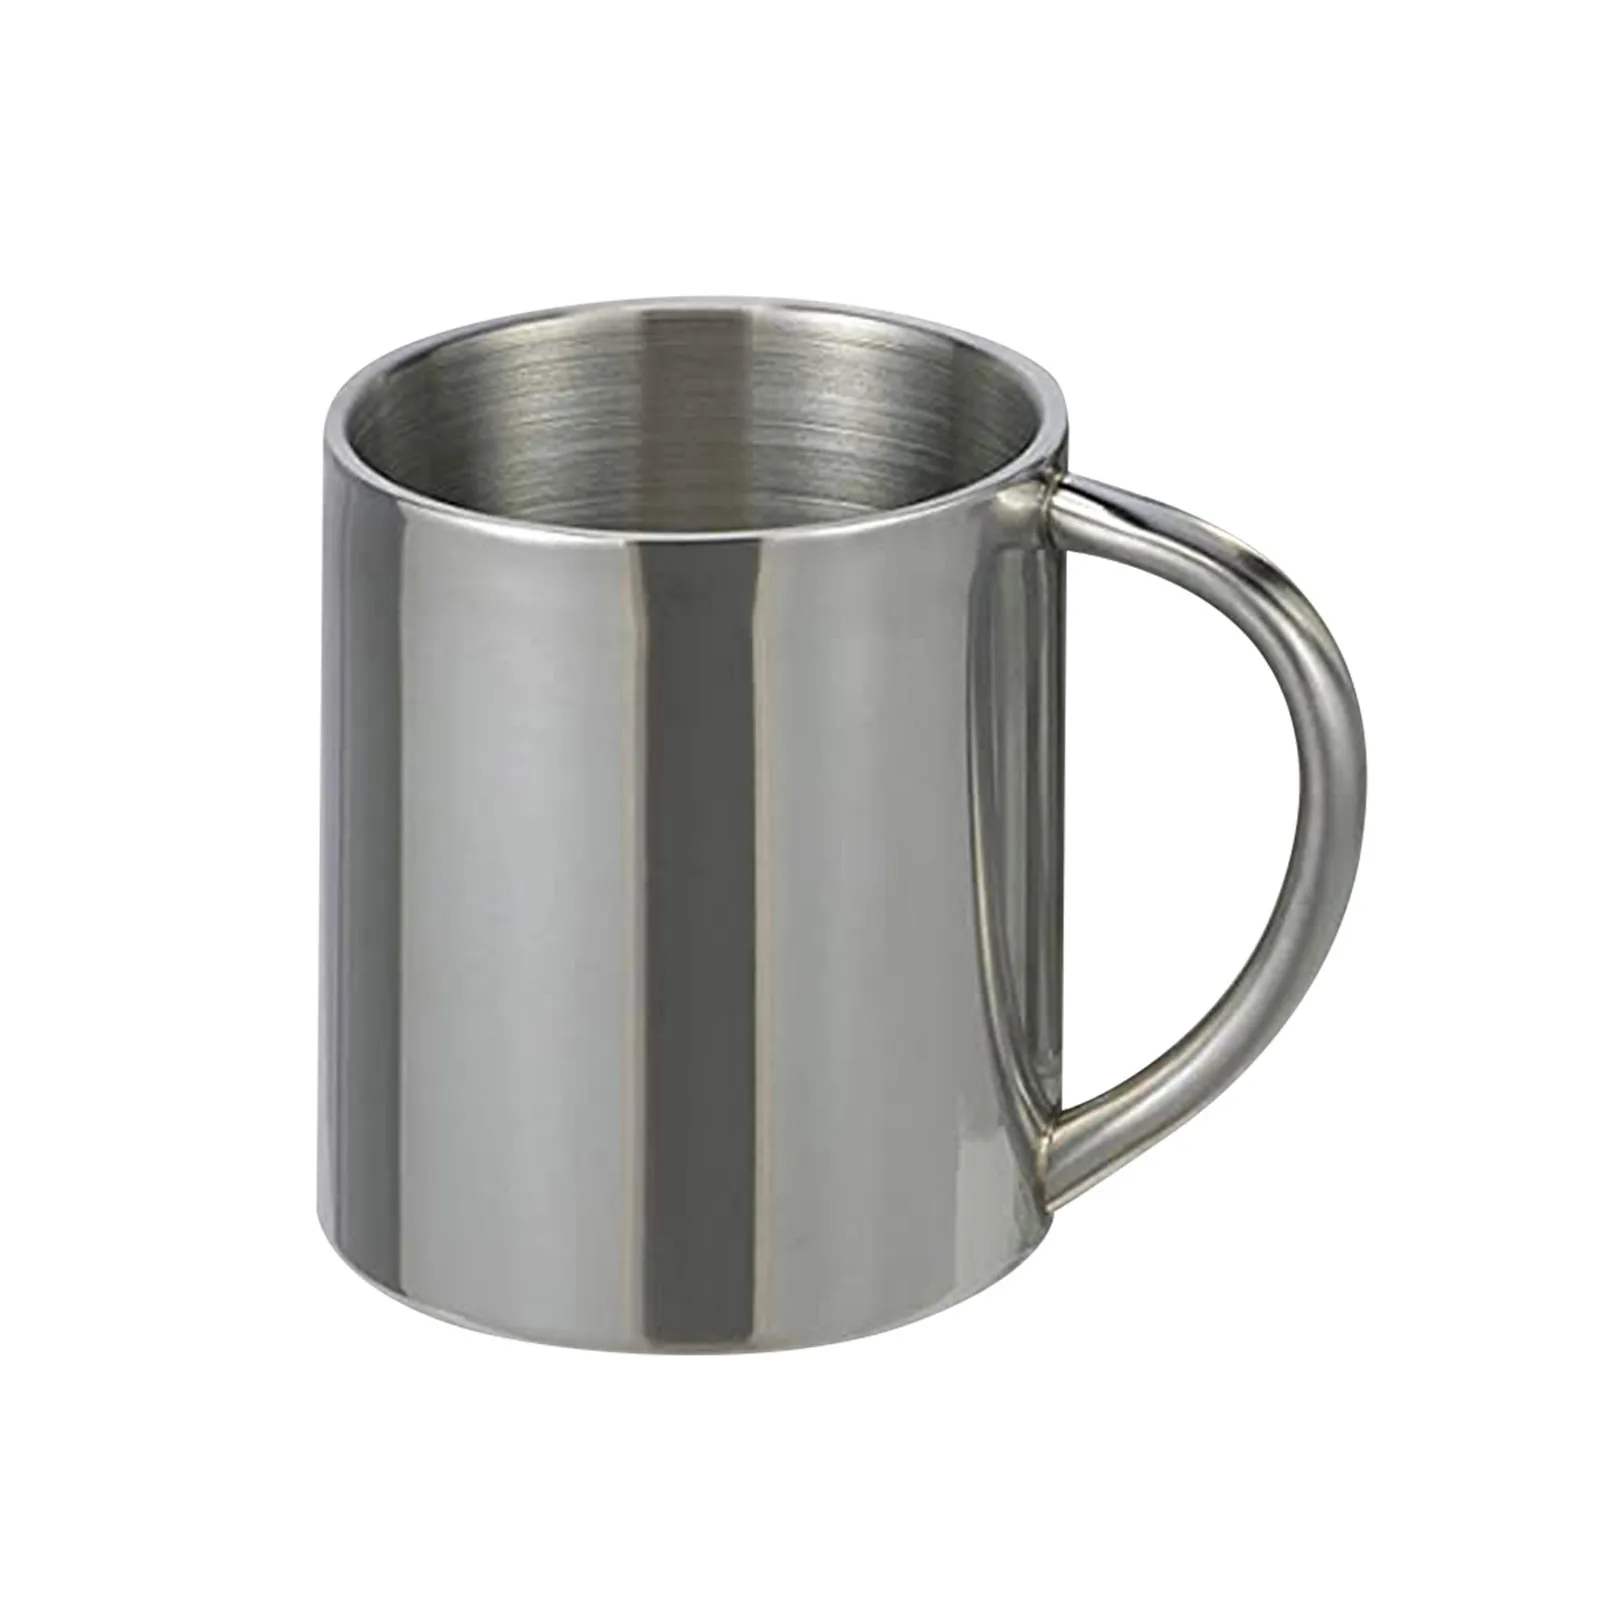 480ml Stainless Steel Travel Mug Drinking Beer Coffee Tea Cup Proper For Camping 